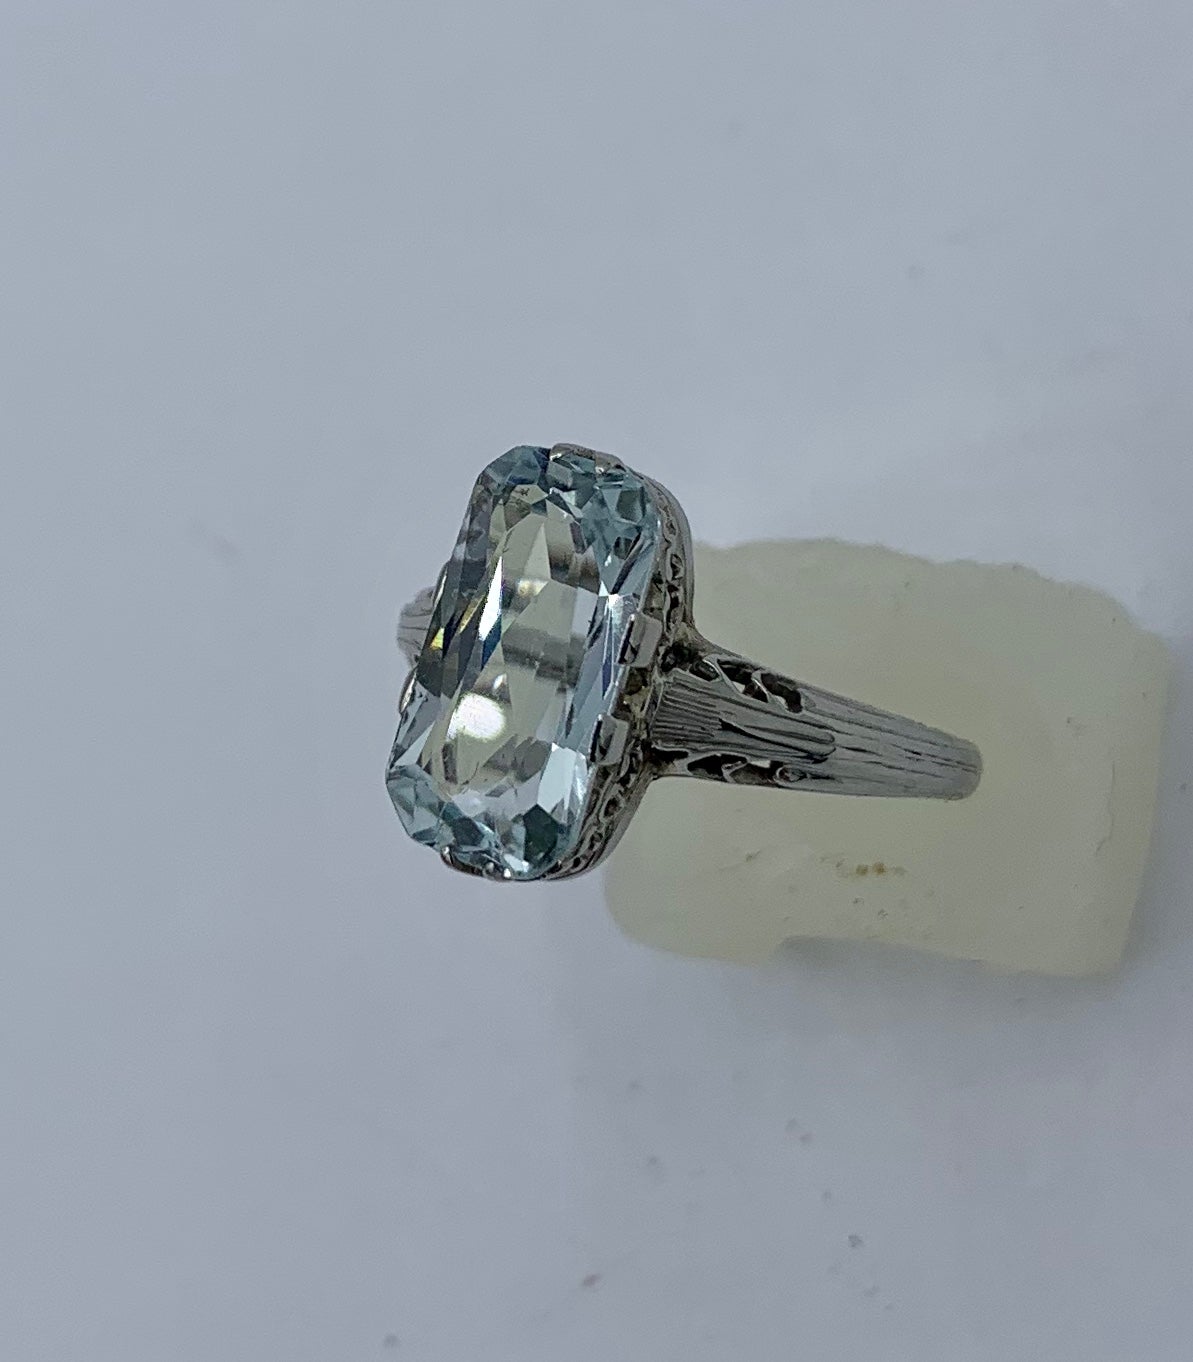 This is a stunning Art Deco - Edwardian 2.3 Carat Emerald Cut Aquamarine Ring in an 18 Karat White Gold ornate Filigree setting of great beauty.  The ring has a gorgeous Emerald Cut Aquamarine gem with lovely light Aqua color.  The dramatic long